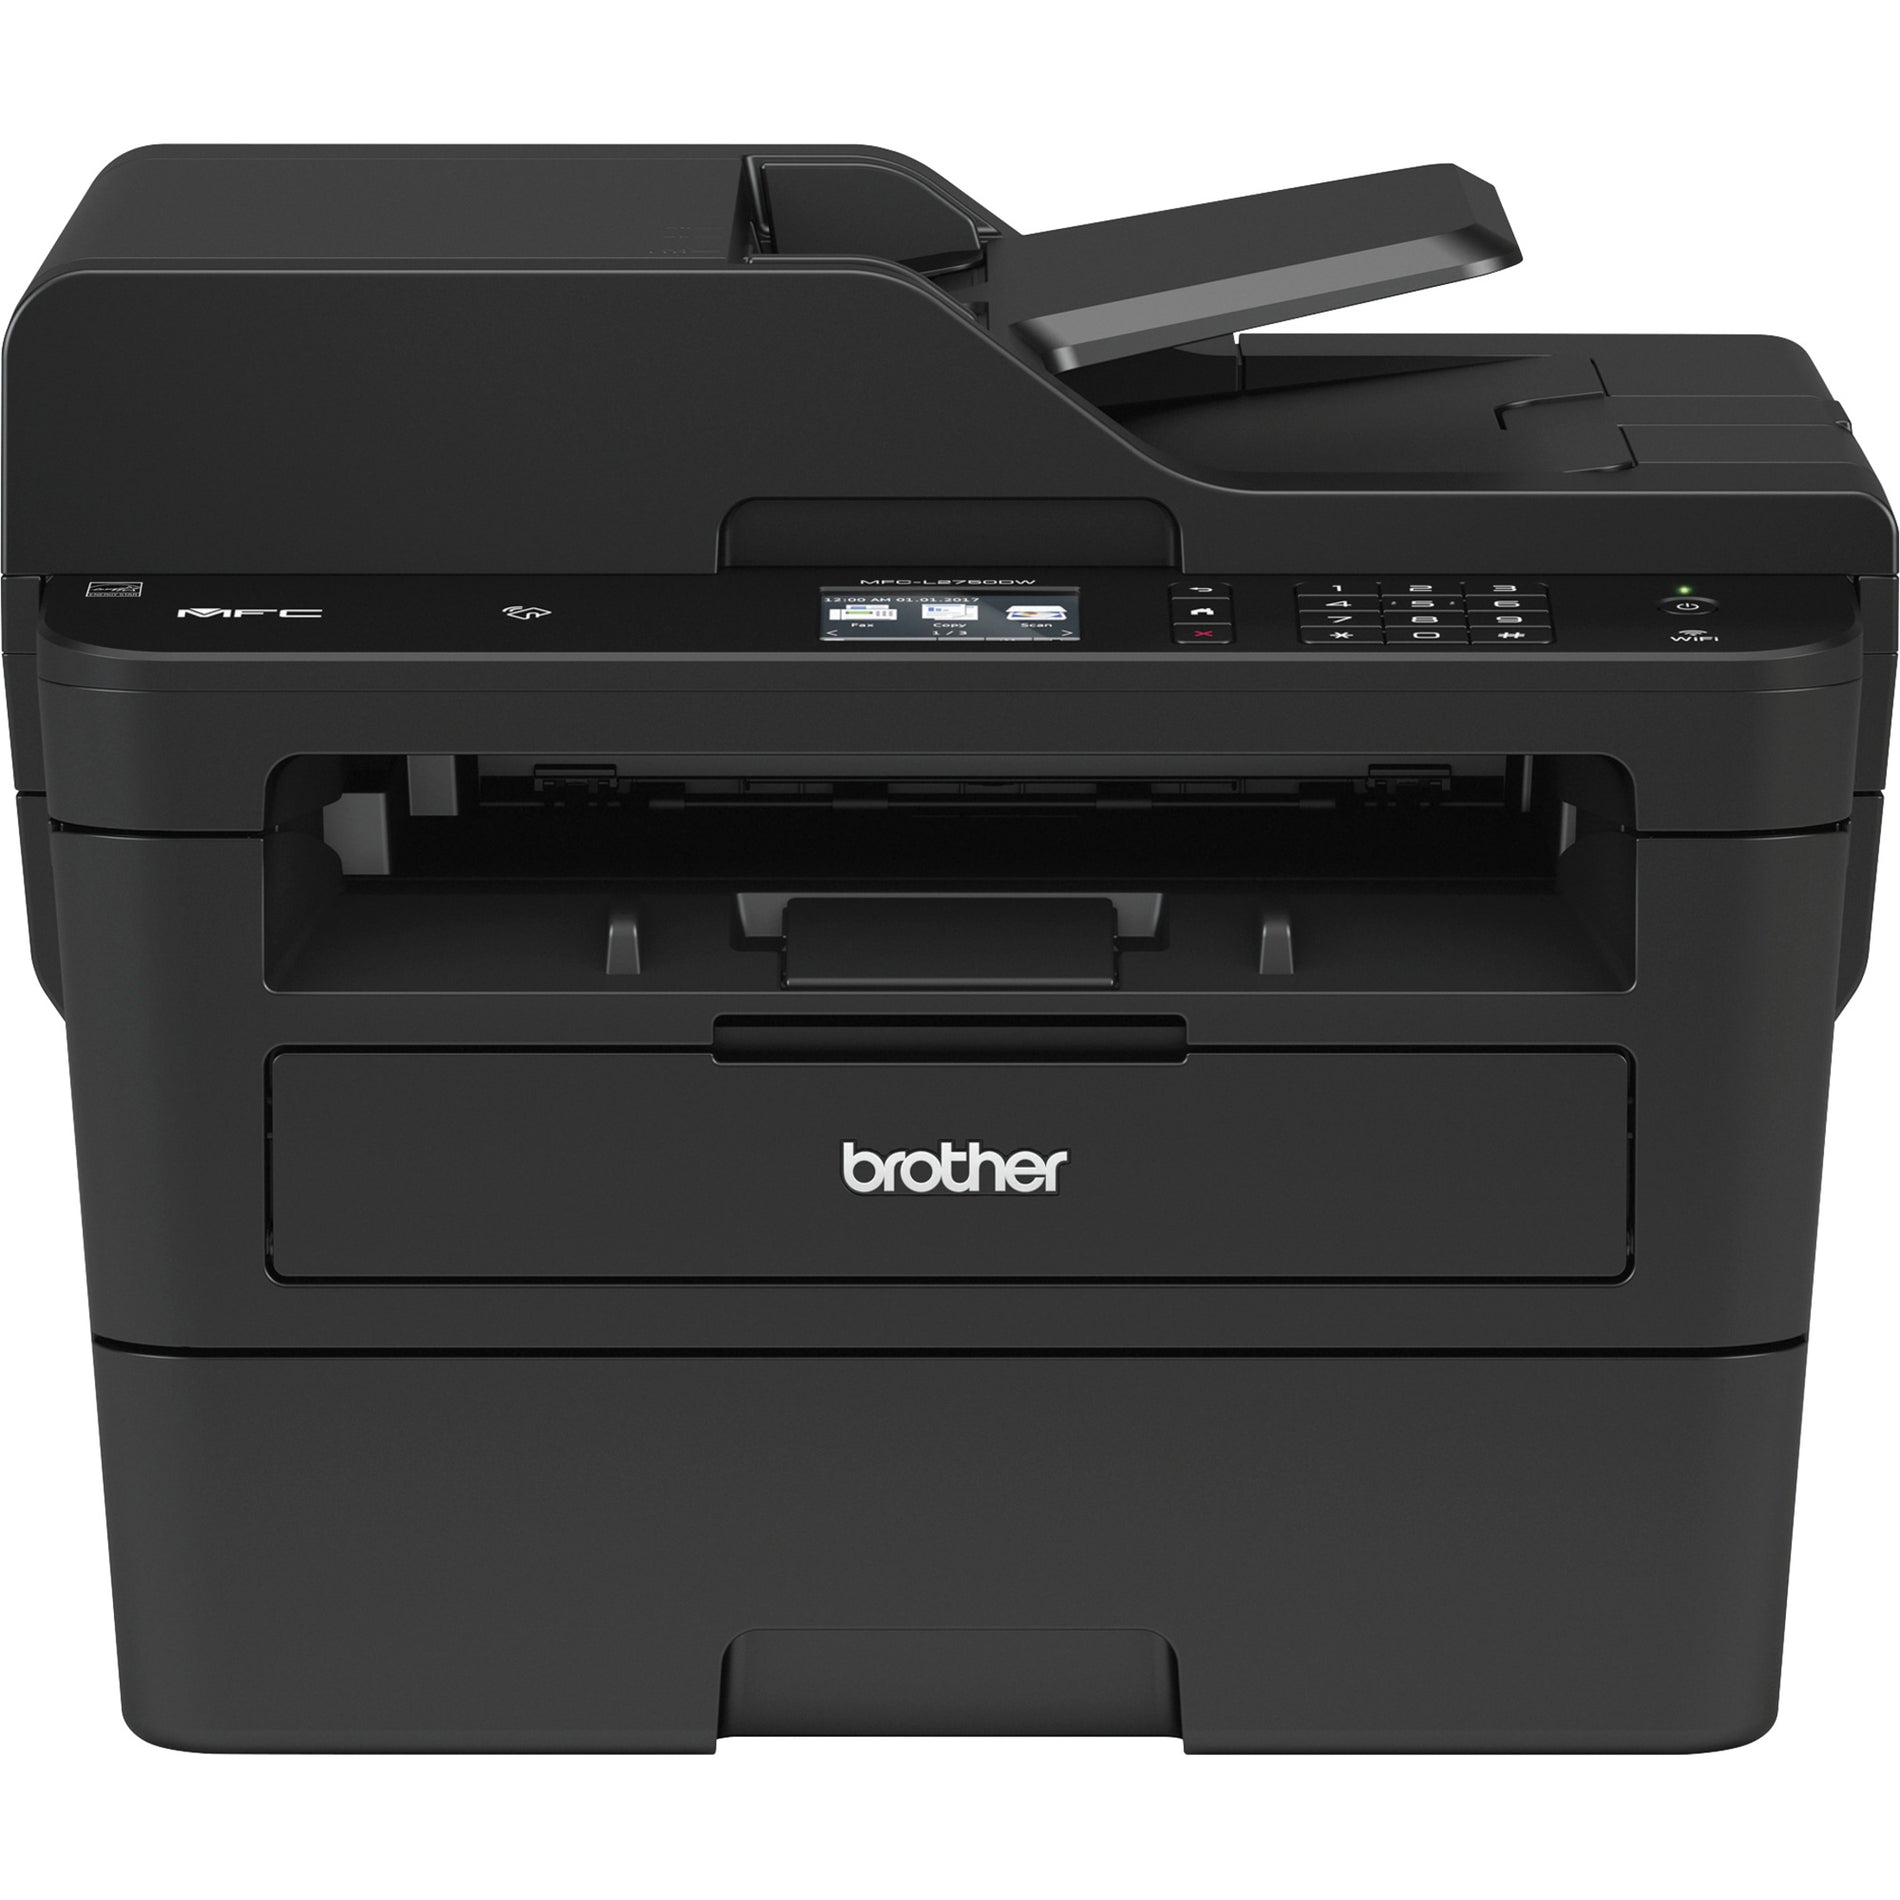 Brother MFC-L2750DW Multifunction Monochrome Laser Printer, 2.7" Touchscreen, 36 ppm